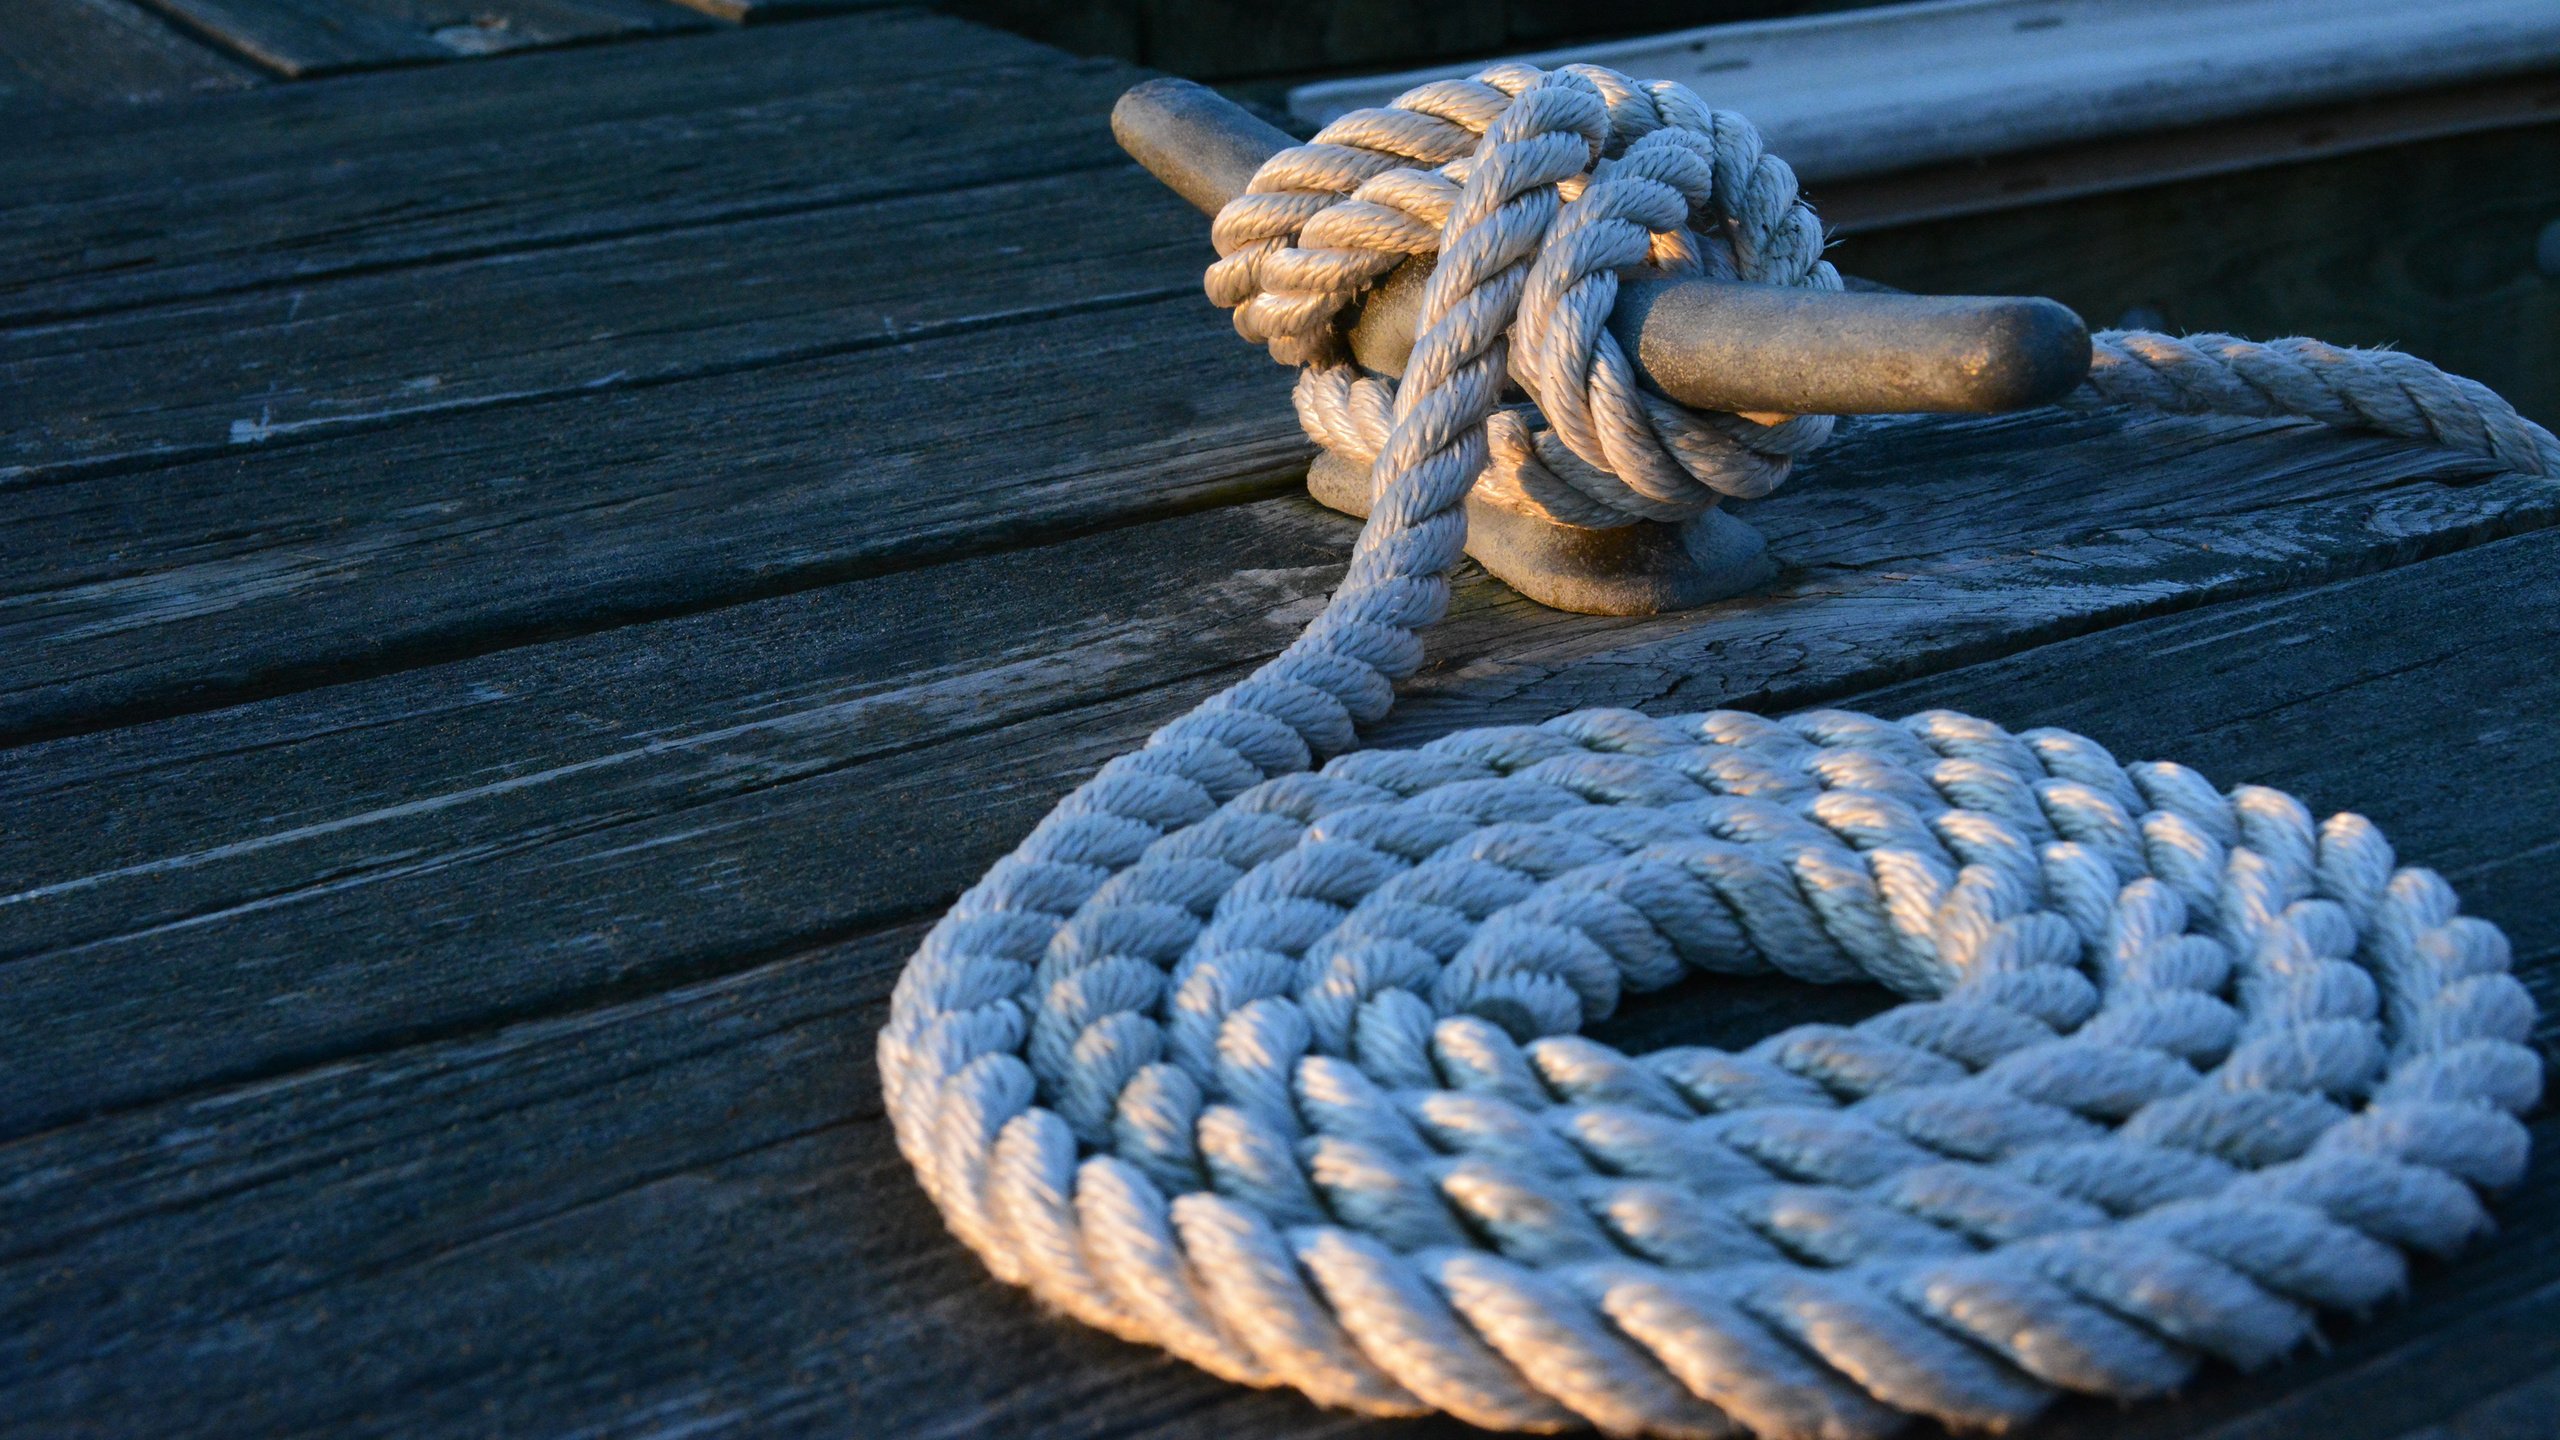 rope on the pier